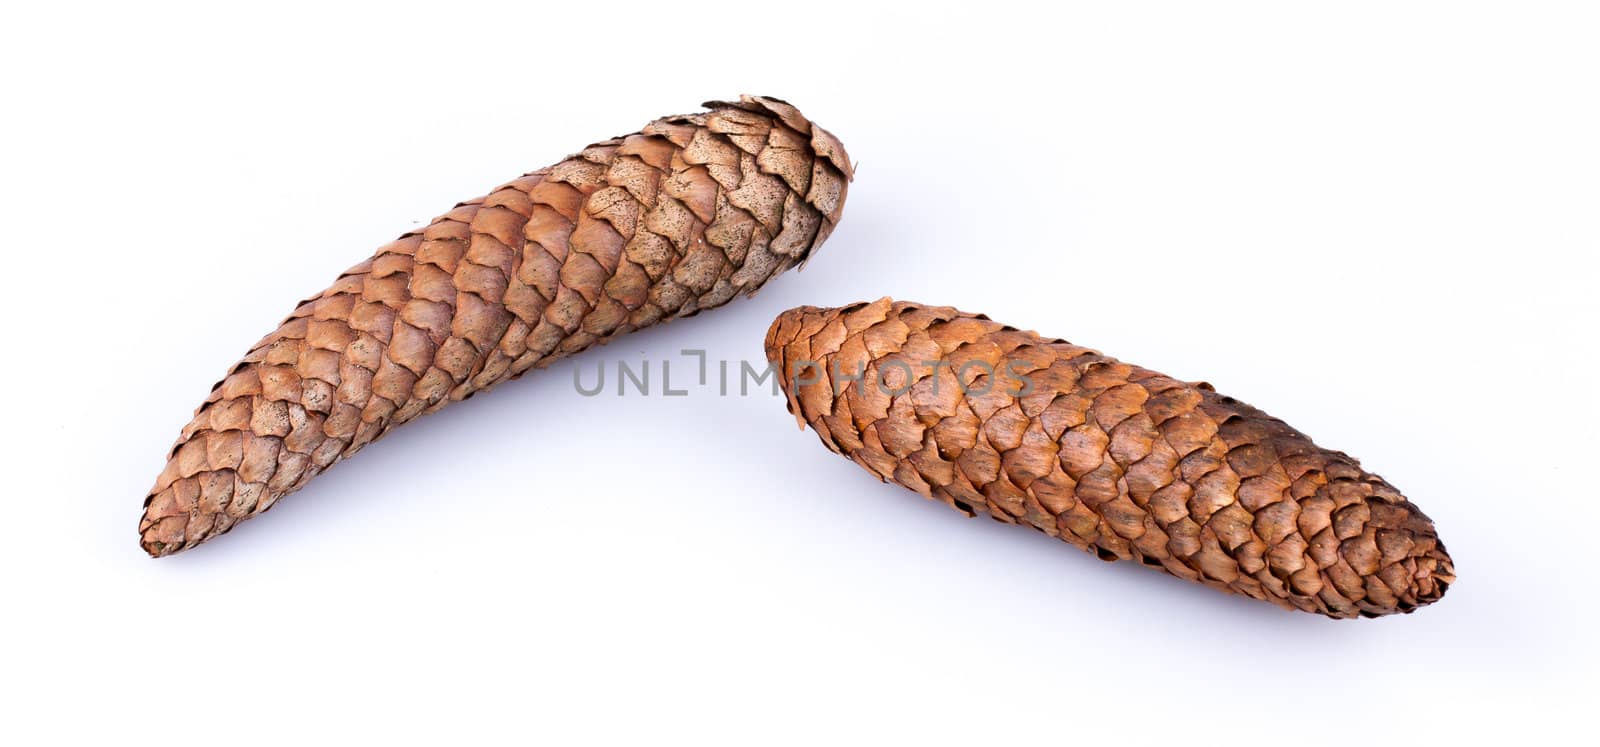 Pine cones isolated on white by michaklootwijk